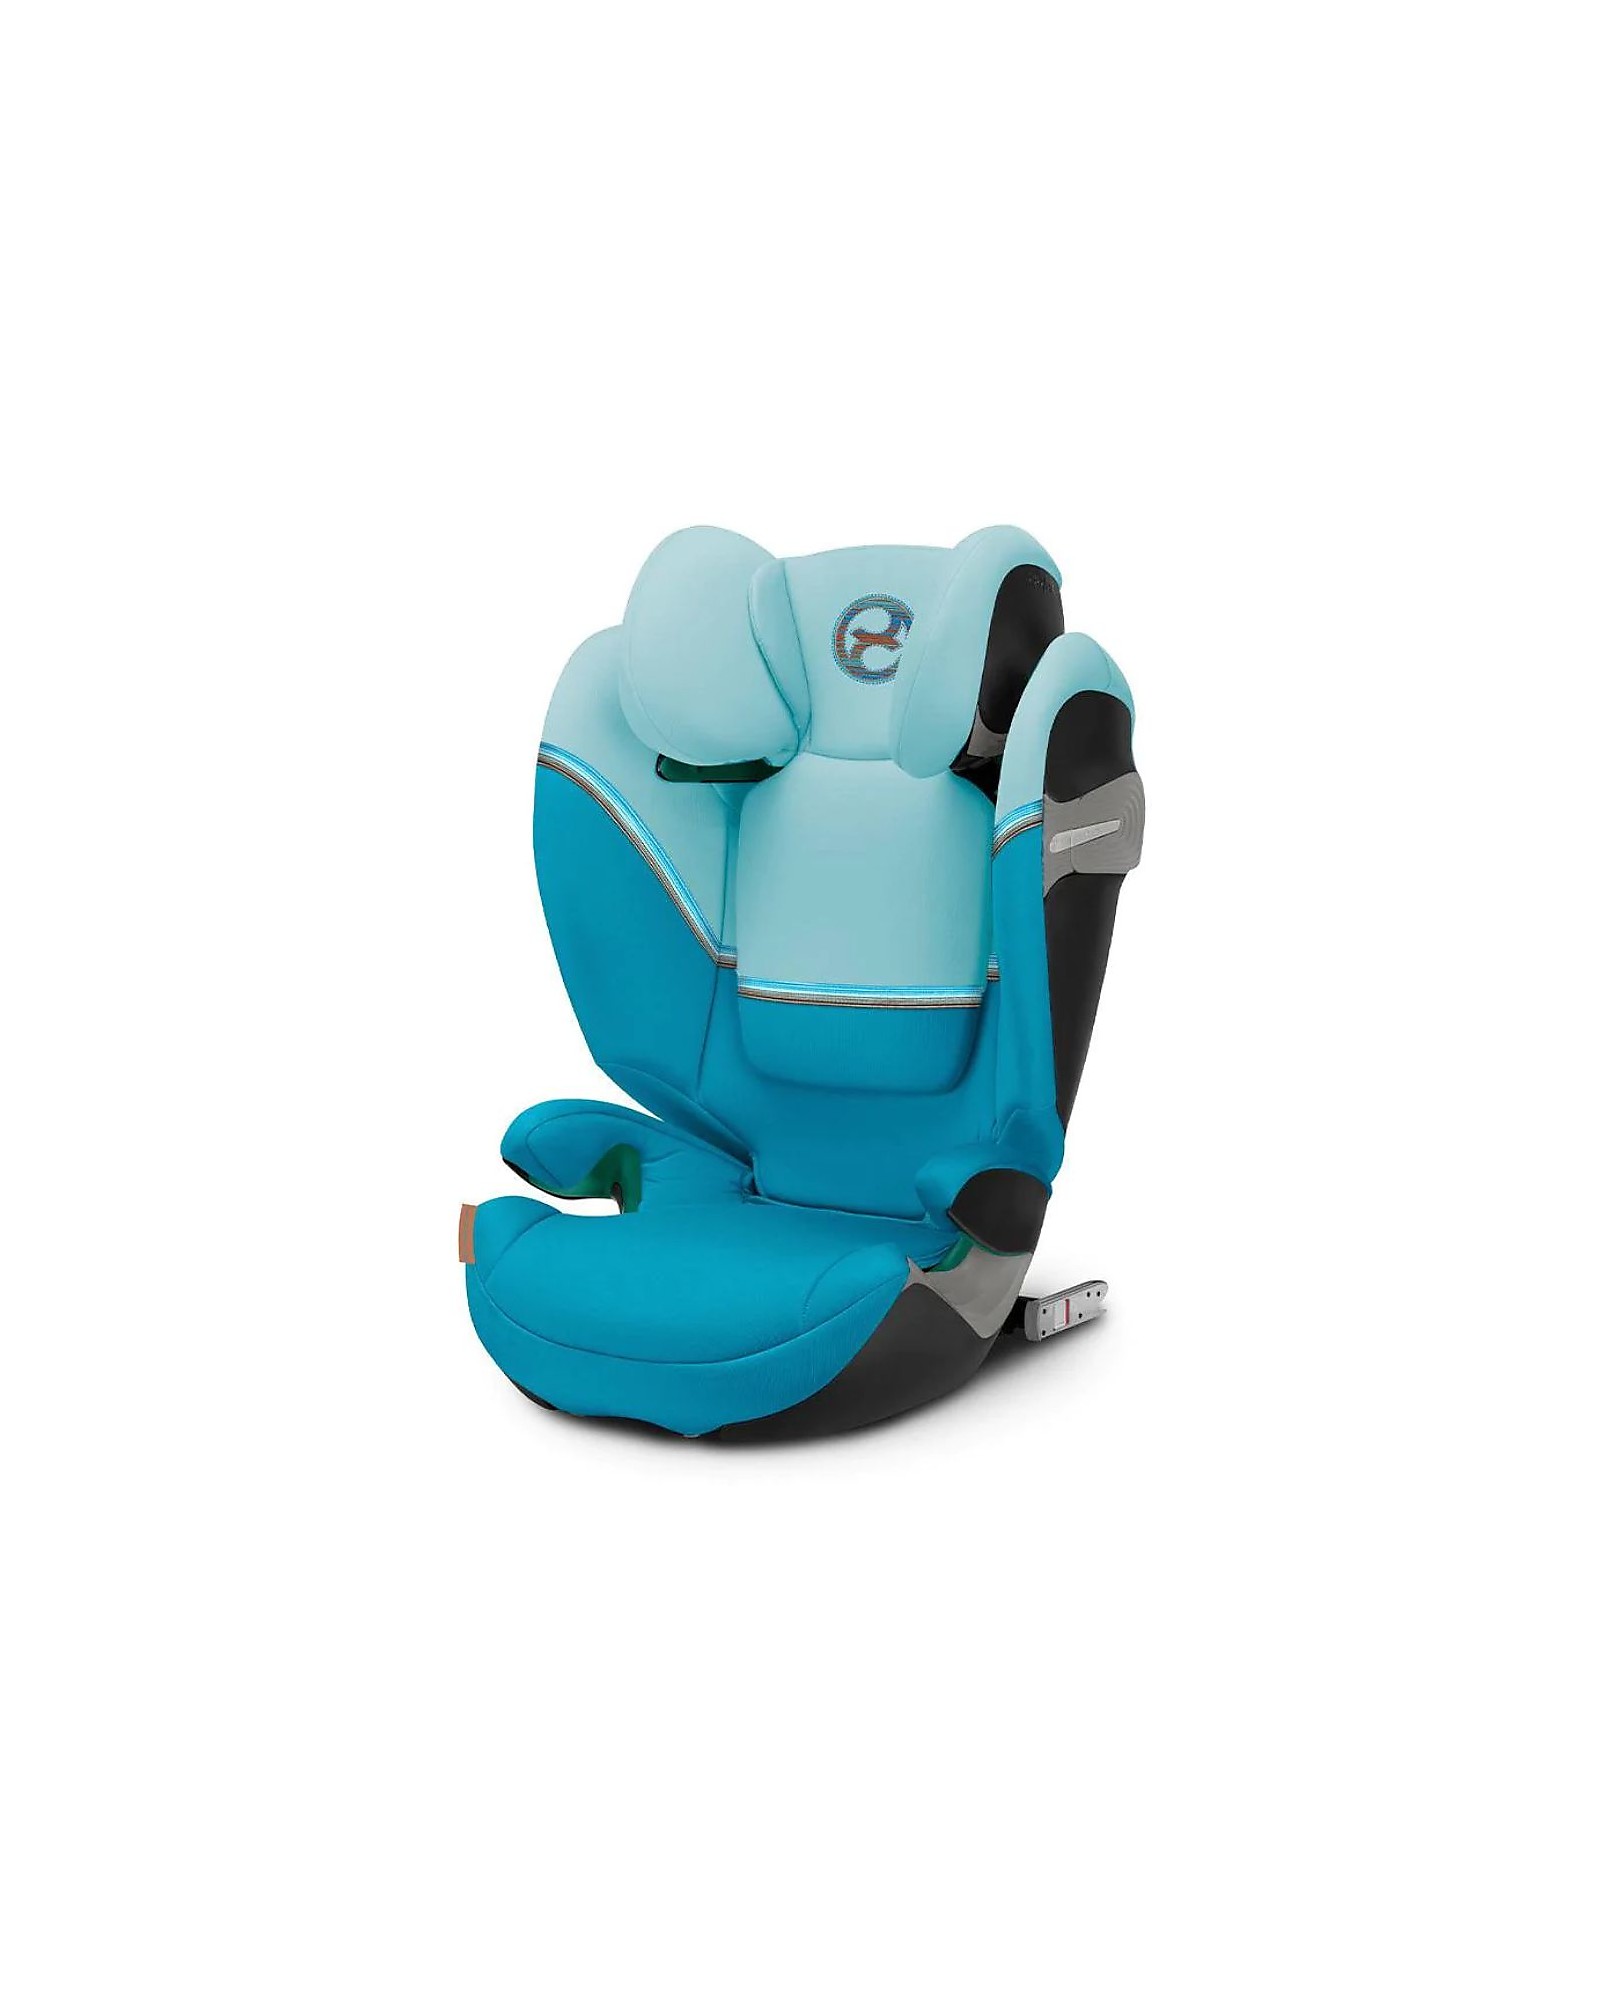 Cybex Solution S2 i-Fix Car Seat - Beach Blue/Turquoise - Group 2/3 unisex  (bambini)